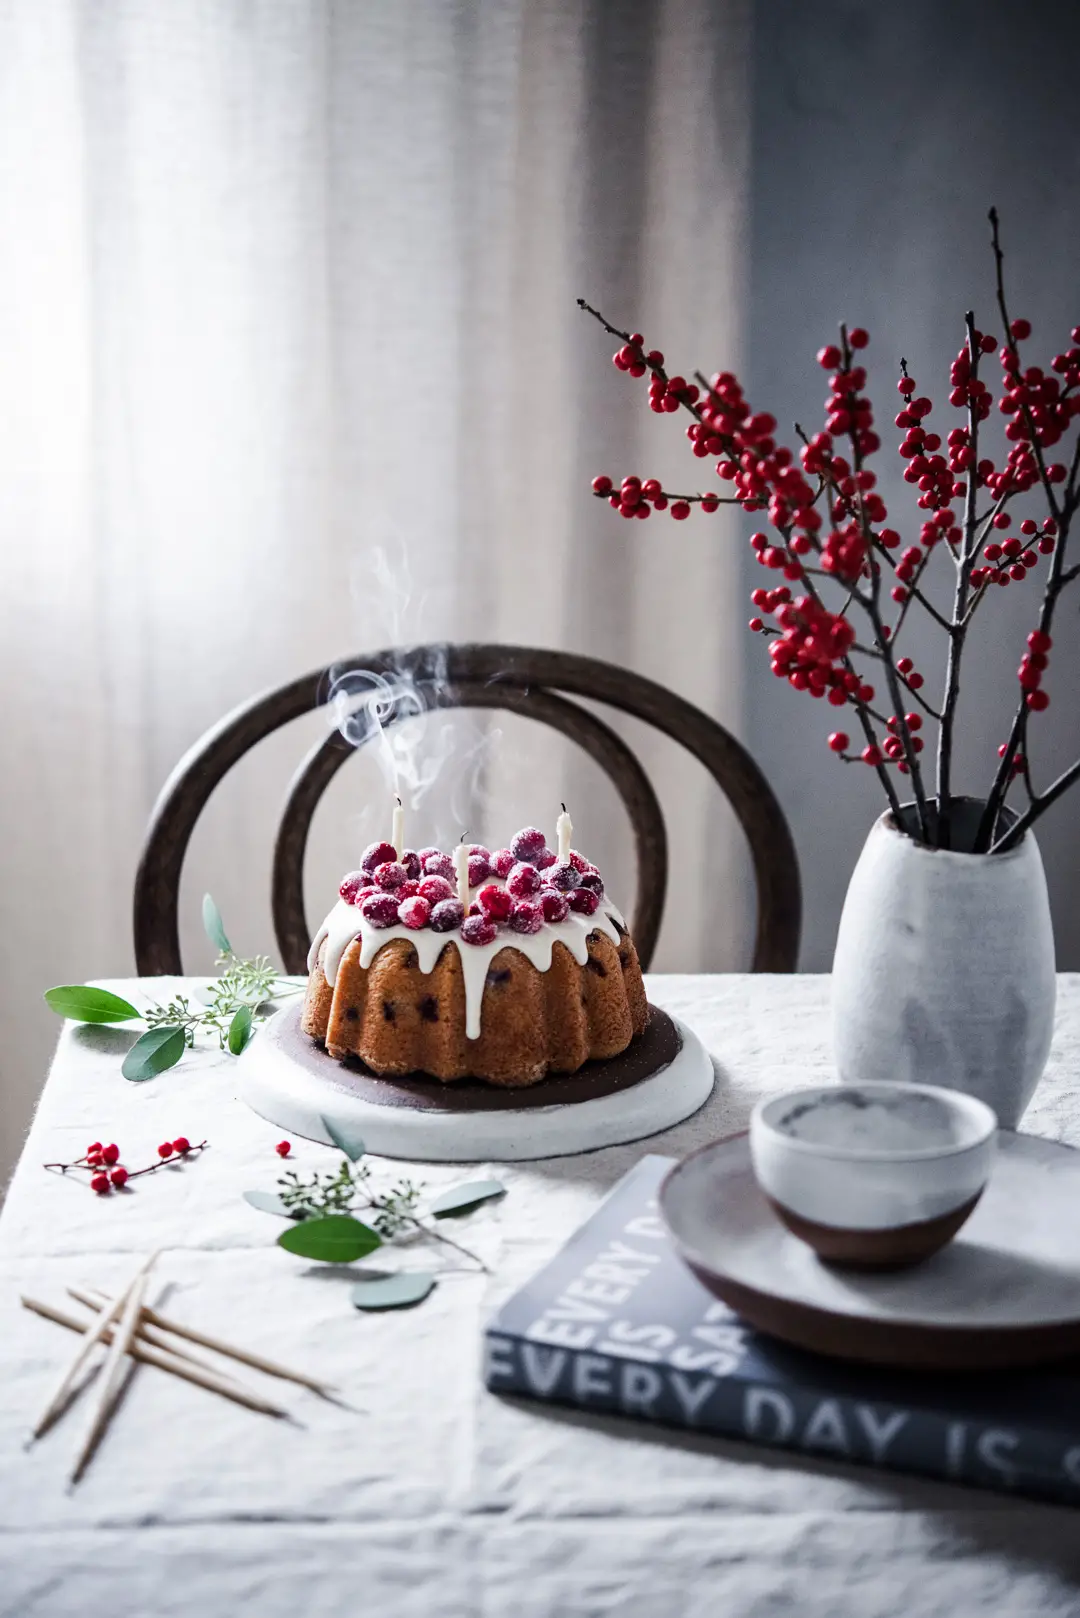 Almost-Famous Cranberry Bundt Cake from Everyday Is Saturday cookbook by Sarah Copeland